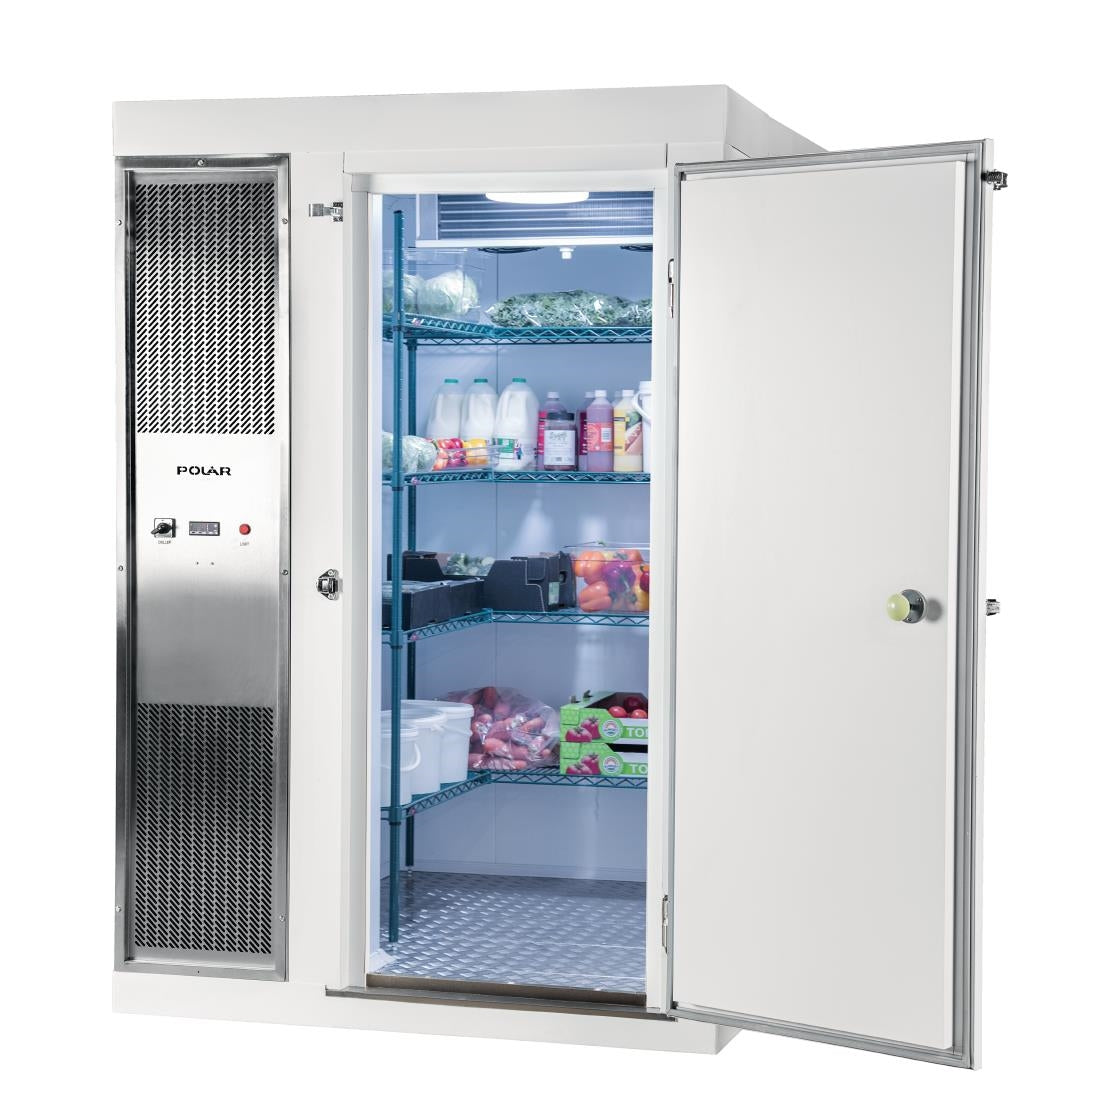 DS483-CWH Polar U-Series 1.5 x 2.1m Integral Walk In Cold Room White JD Catering Equipment Solutions Ltd